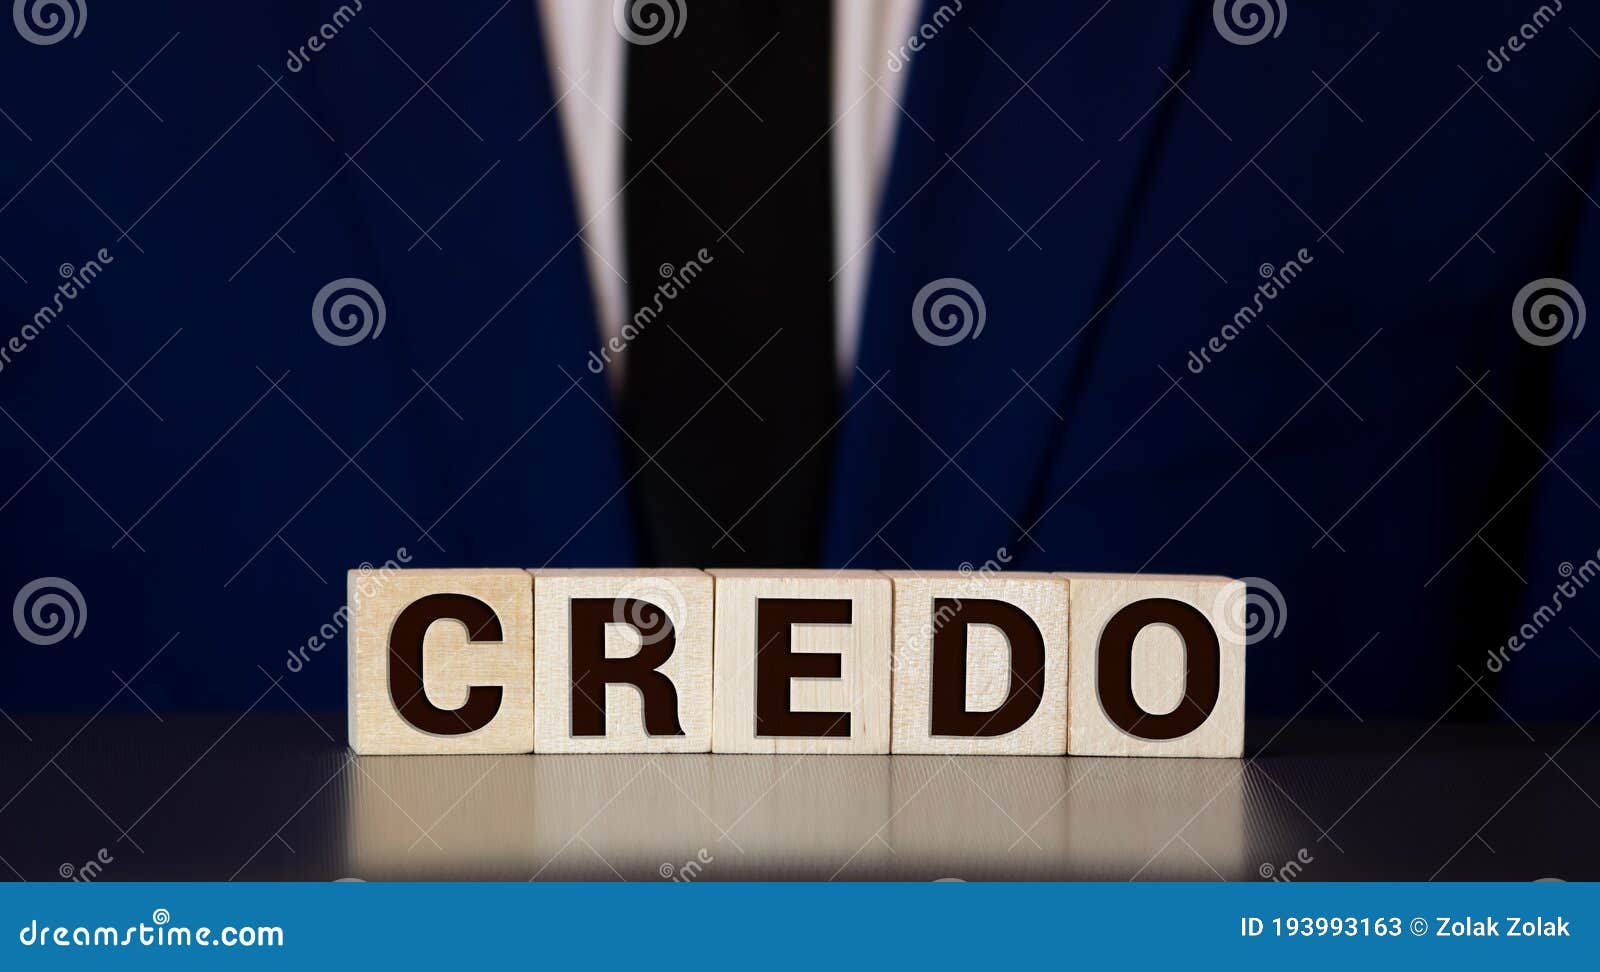 credo word concept on cubes